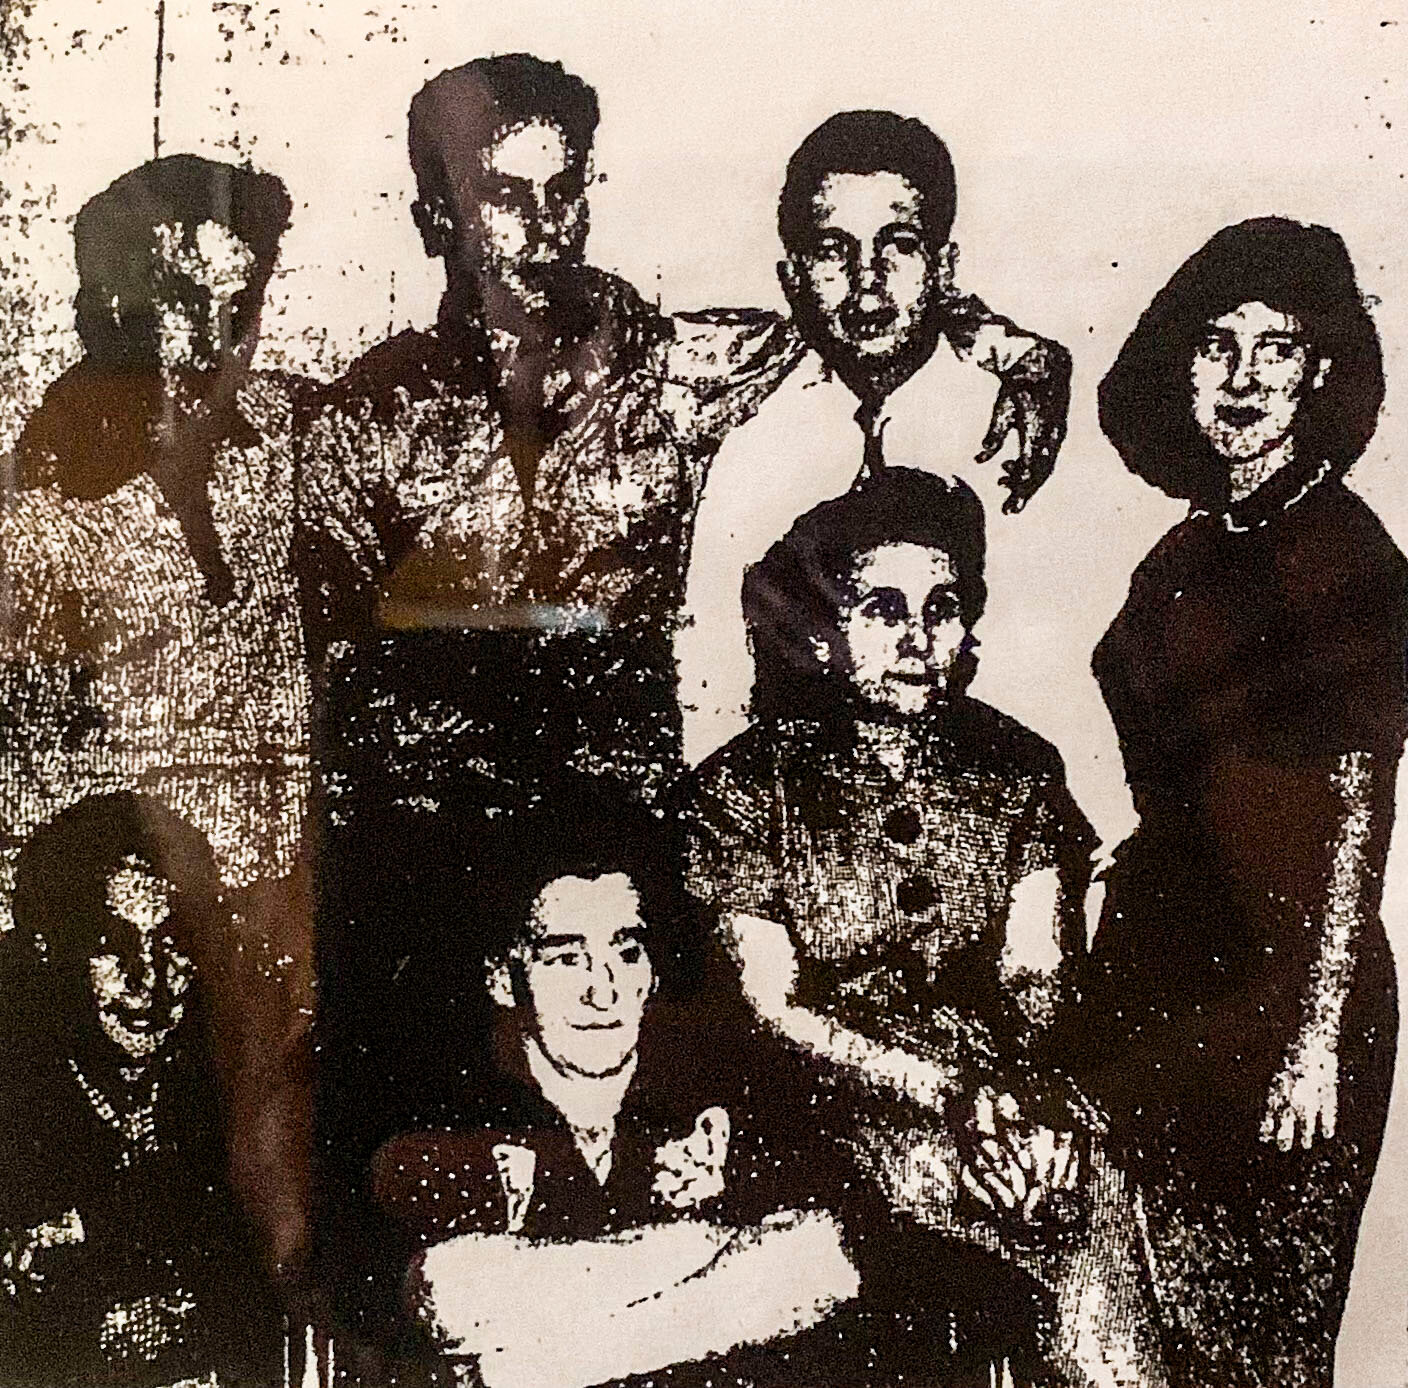 A photo in the Ledger of a reunited family included standing from left is his siblings Ralph, Moss, Paul and Marliyn and seated Ralph, Martha Shoemaker (grandmother), and Mary Jesse (Moss’ mother).